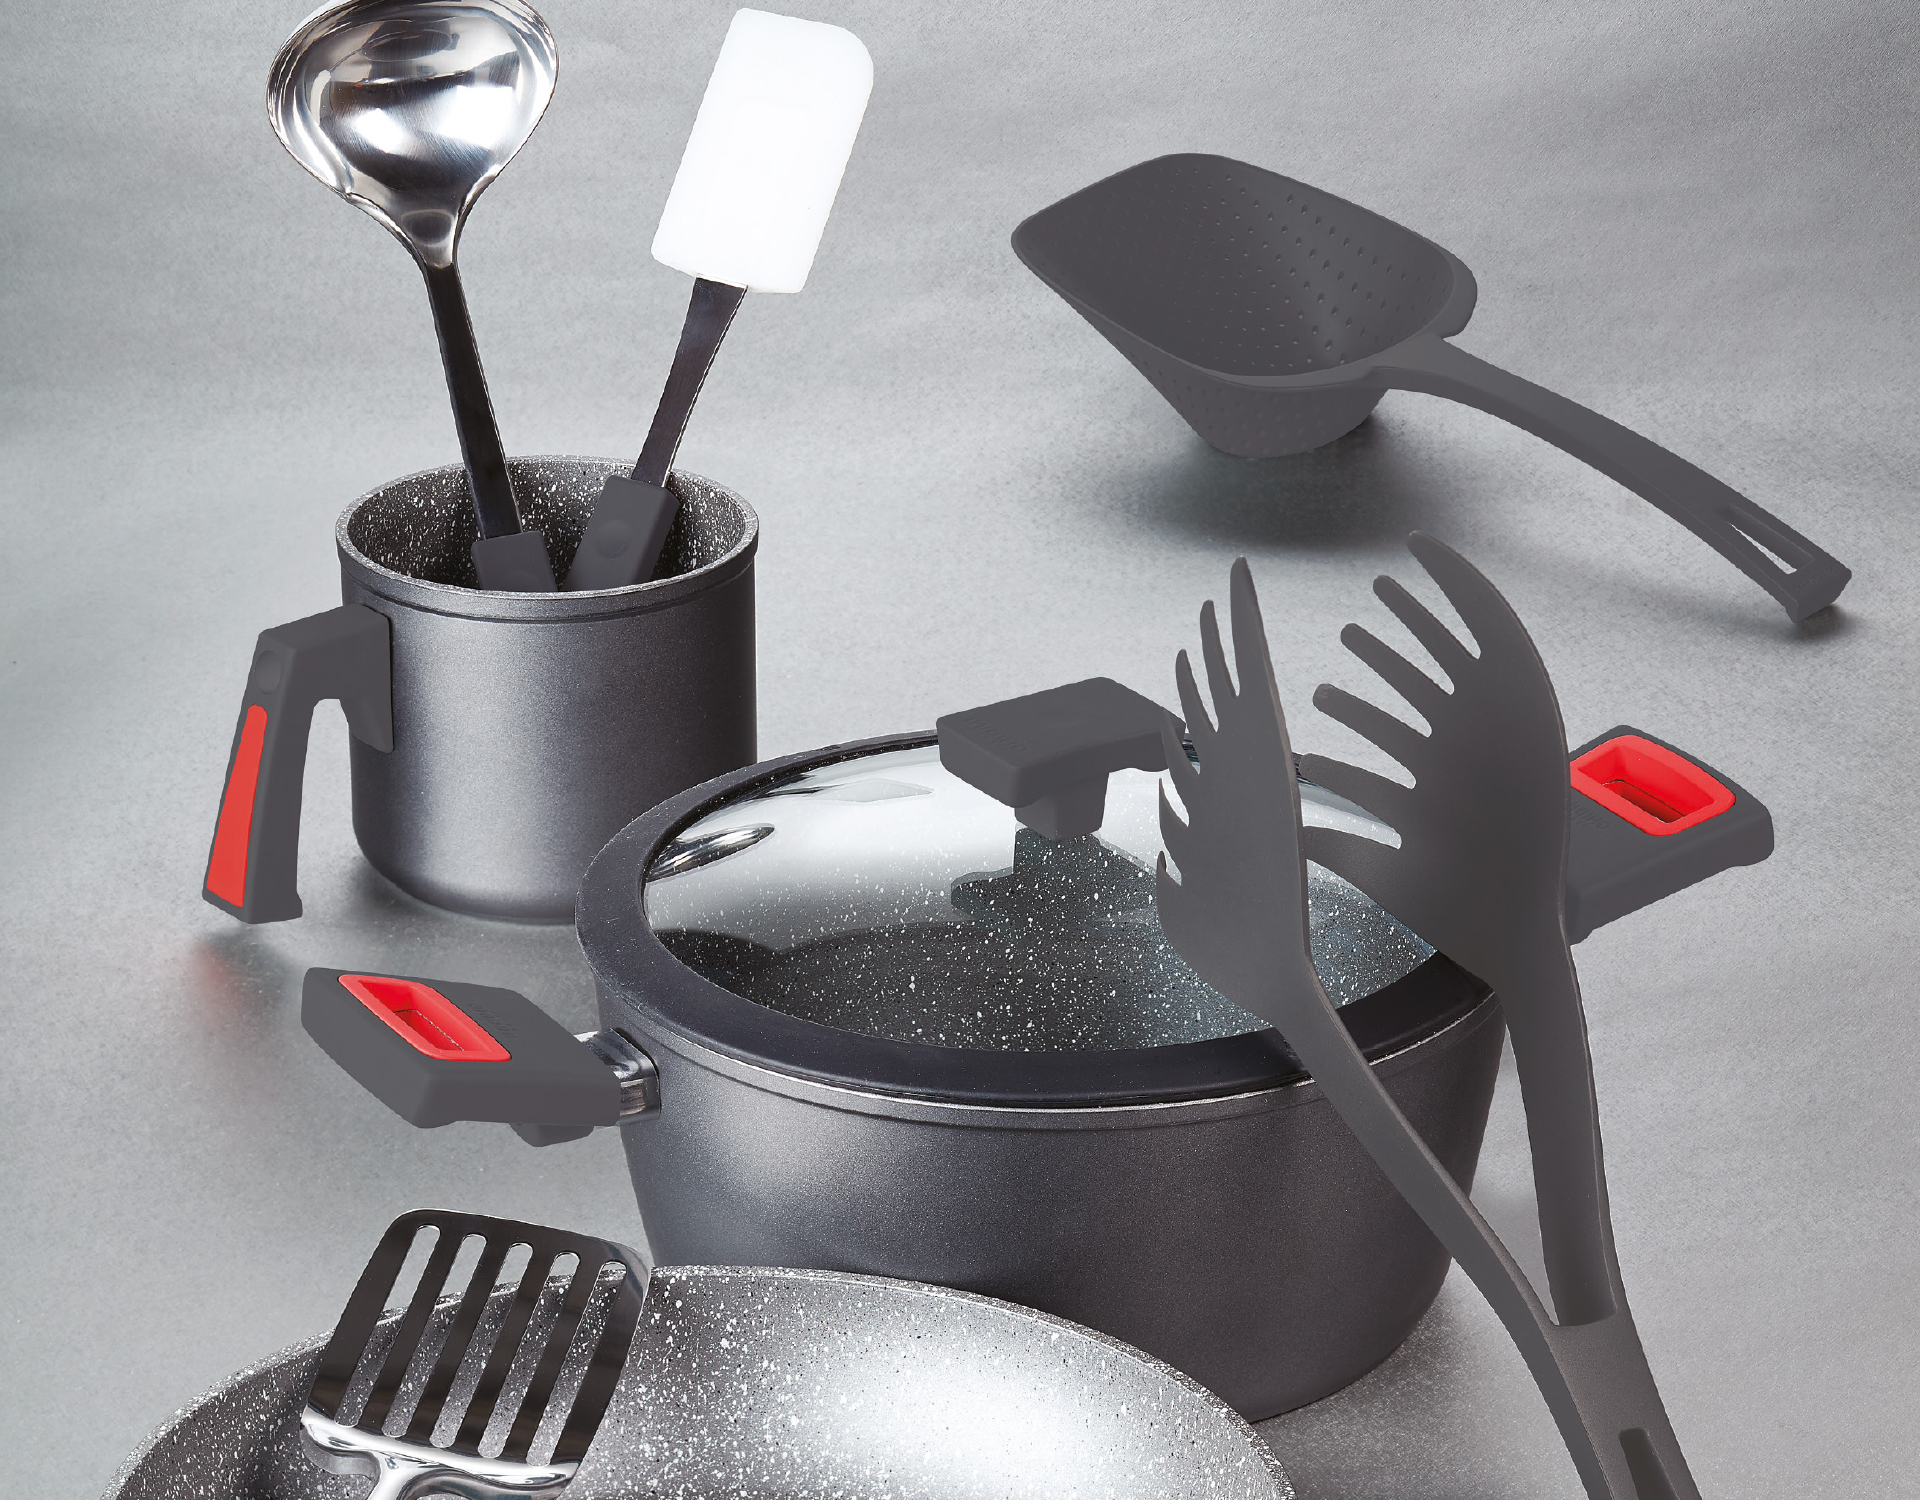 Exceptional Italian kitchen tools set made by Ghidini